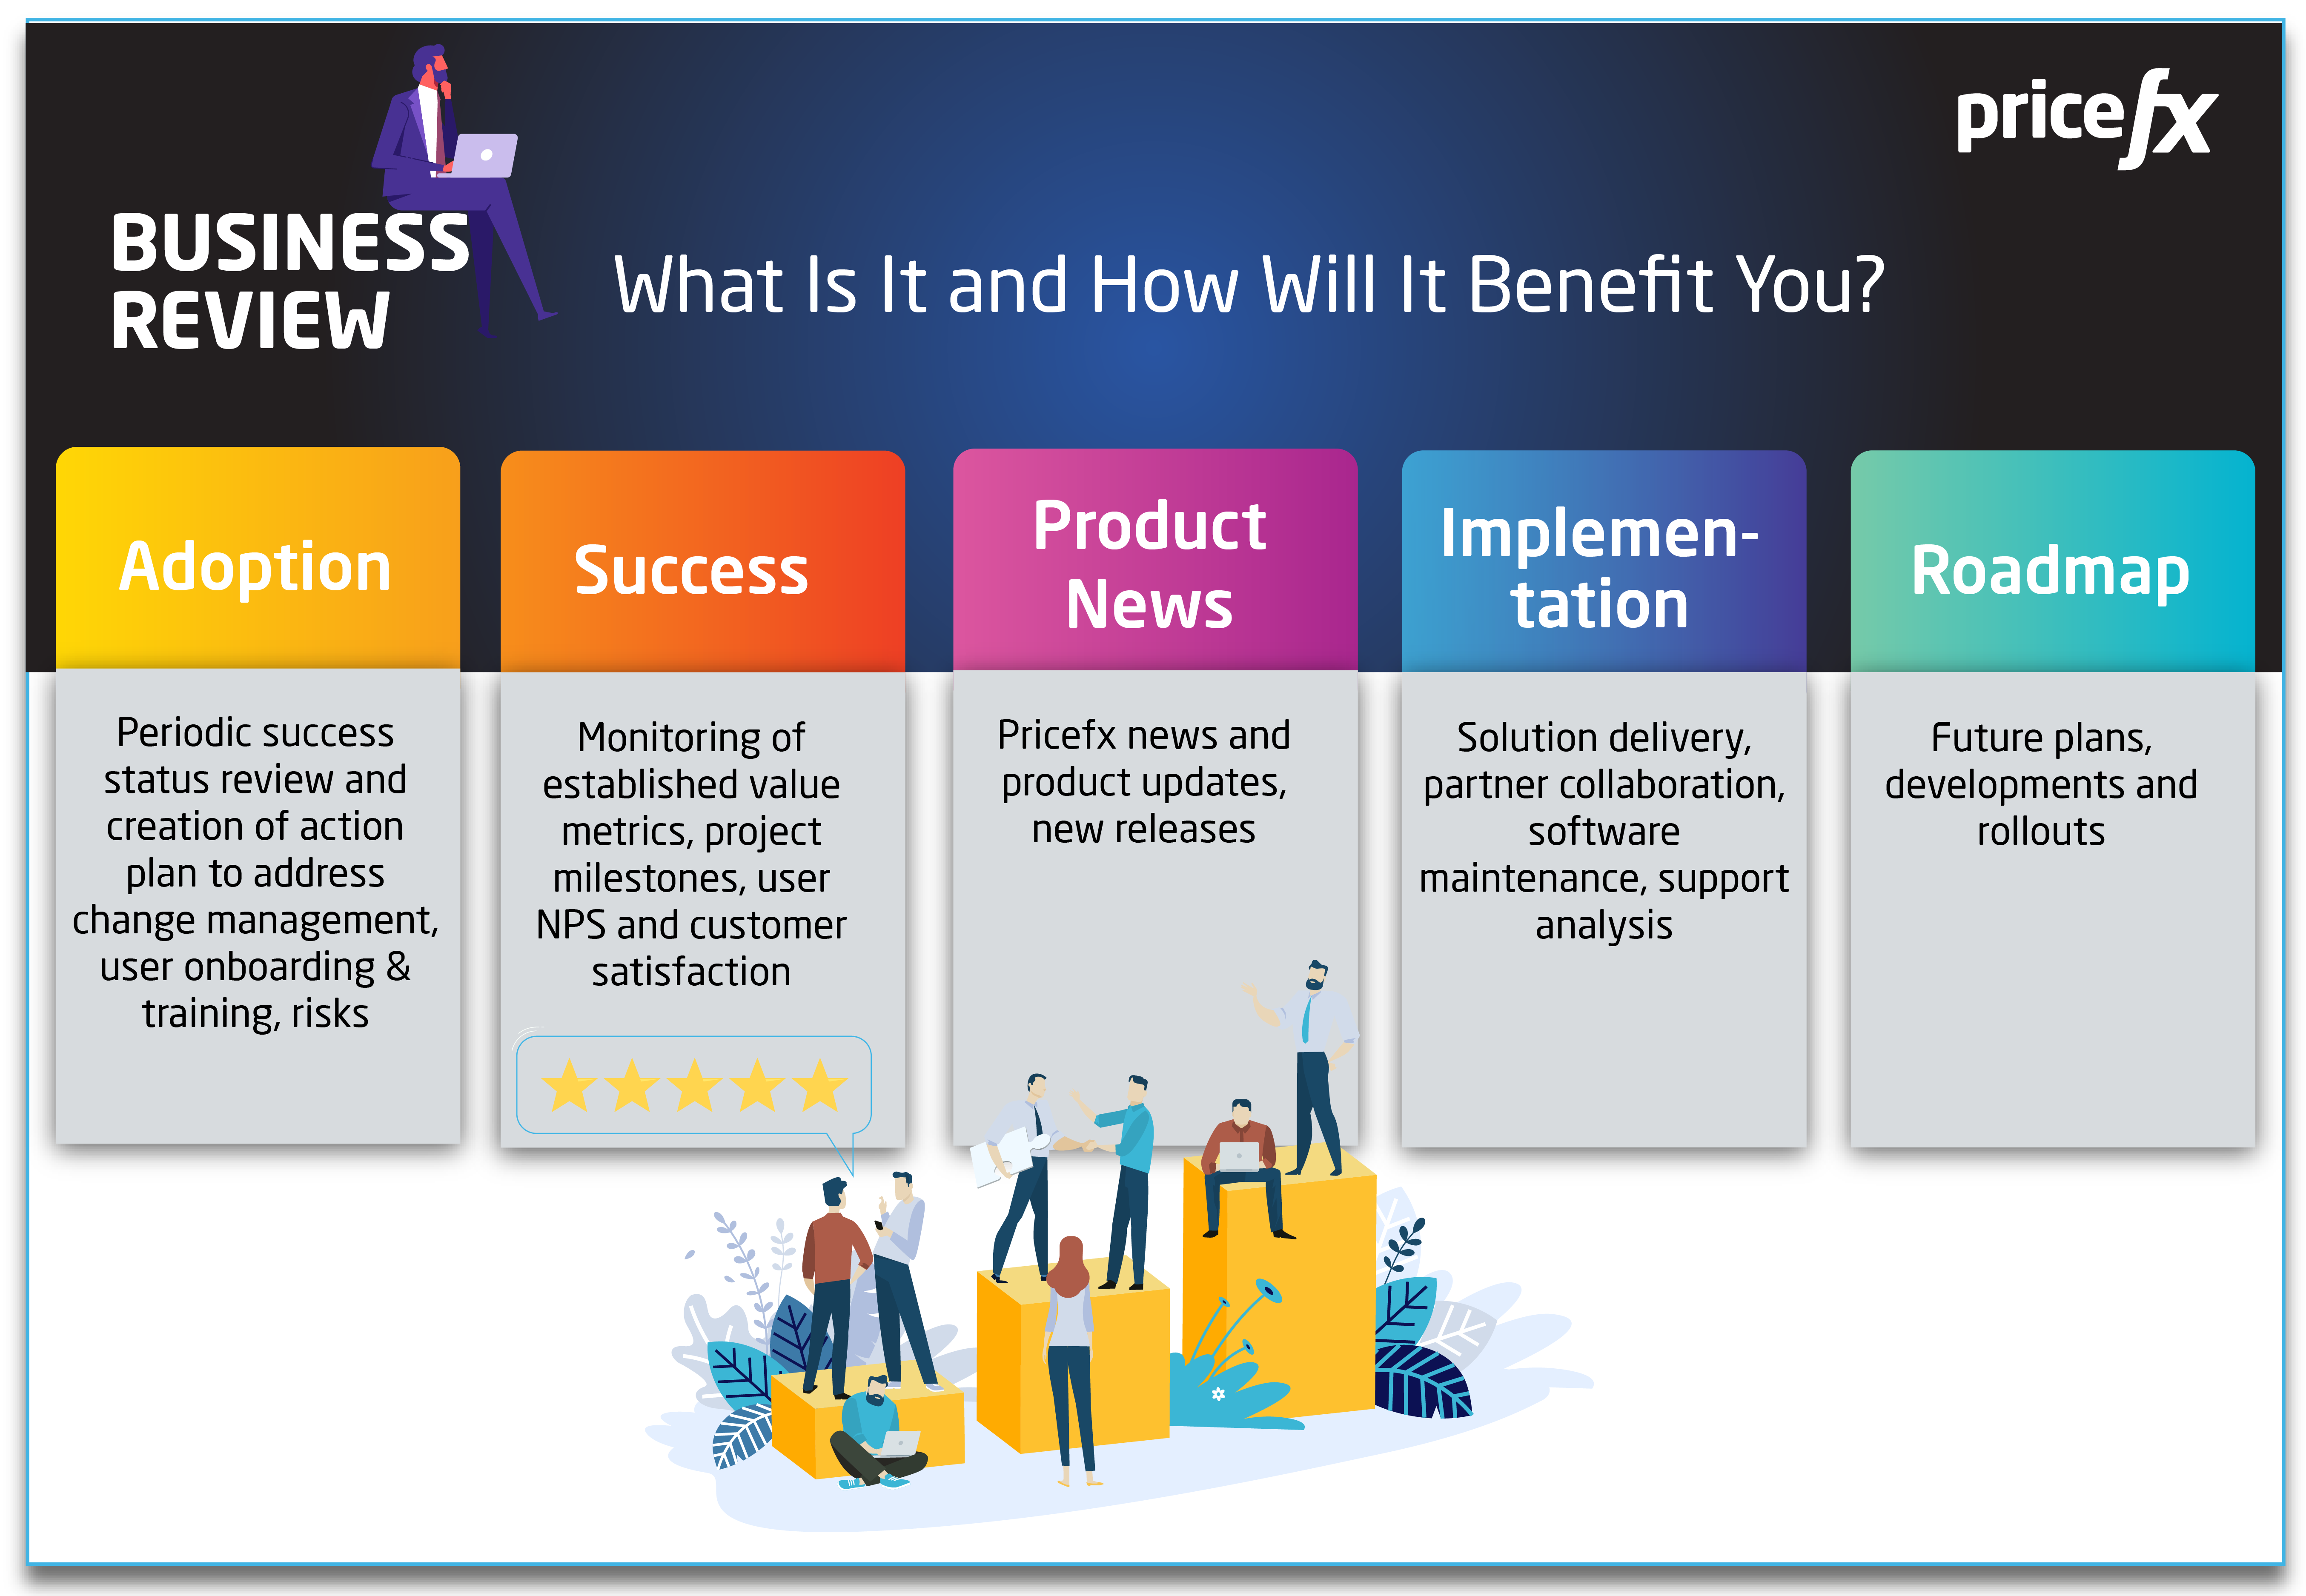 Business-Review-what-is-it-and-how-it-will-benefit-you